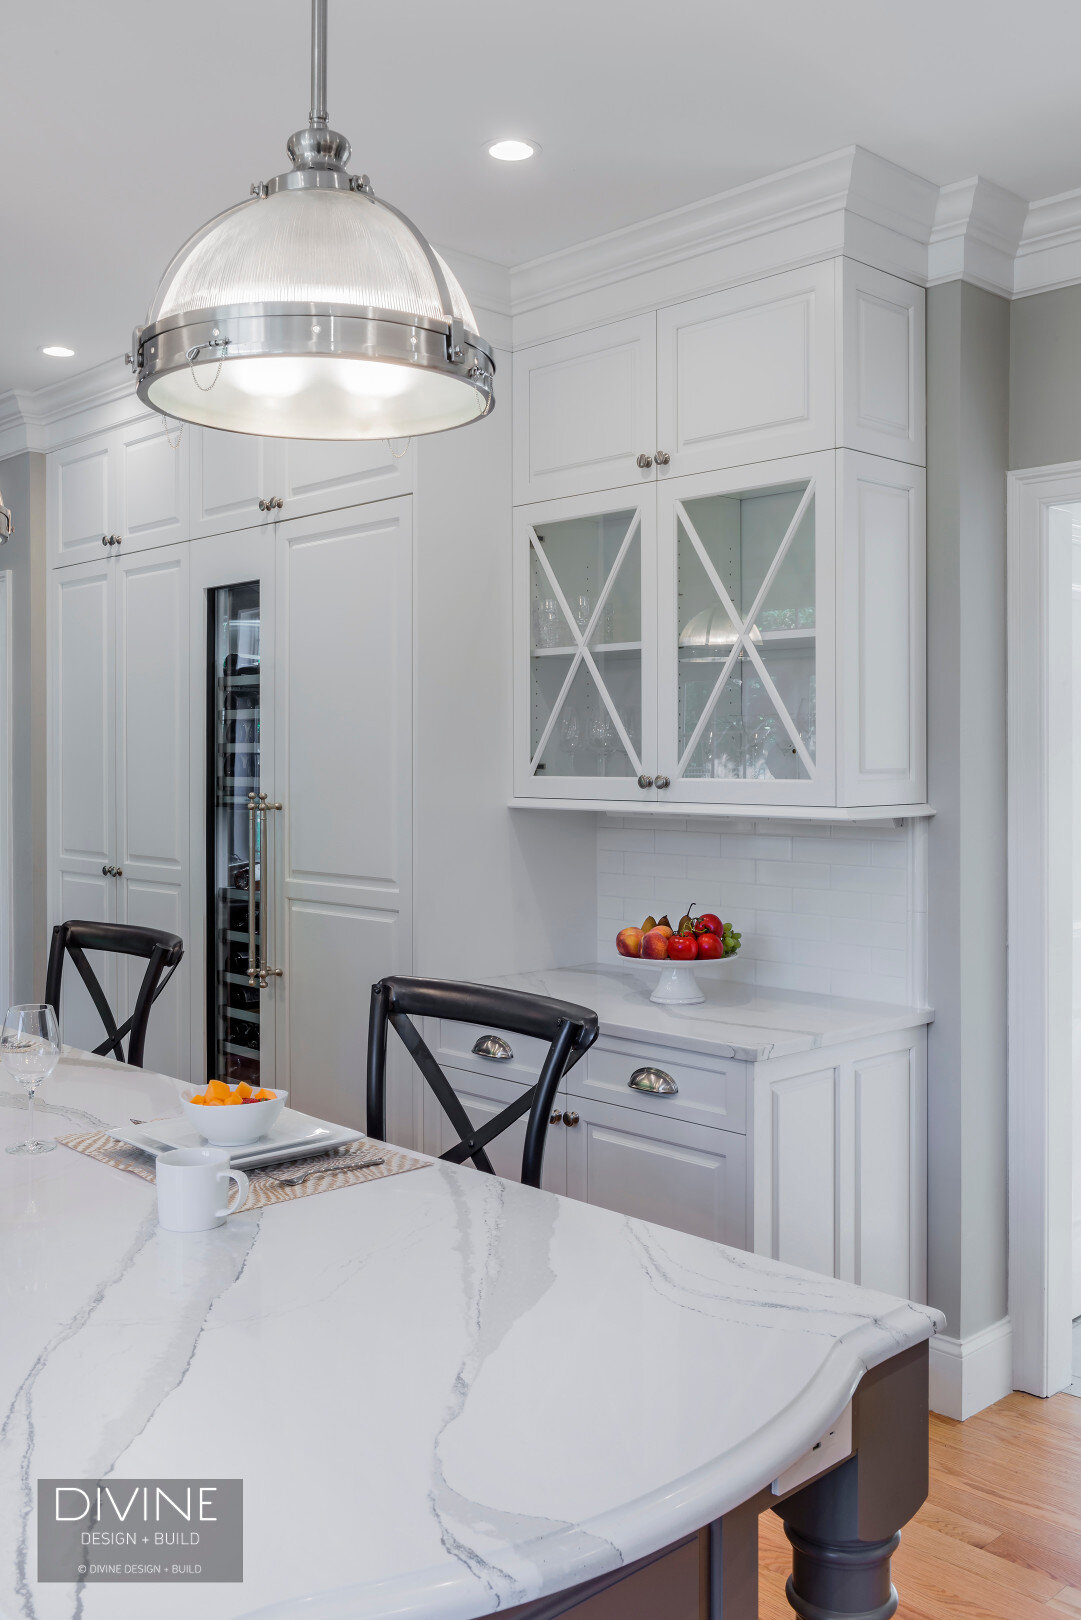  traditional shaker style kitchen. wolf appliances and chrome pendant lights. Calacatta countertops and medium hardwood floors. pull out pantry storage.